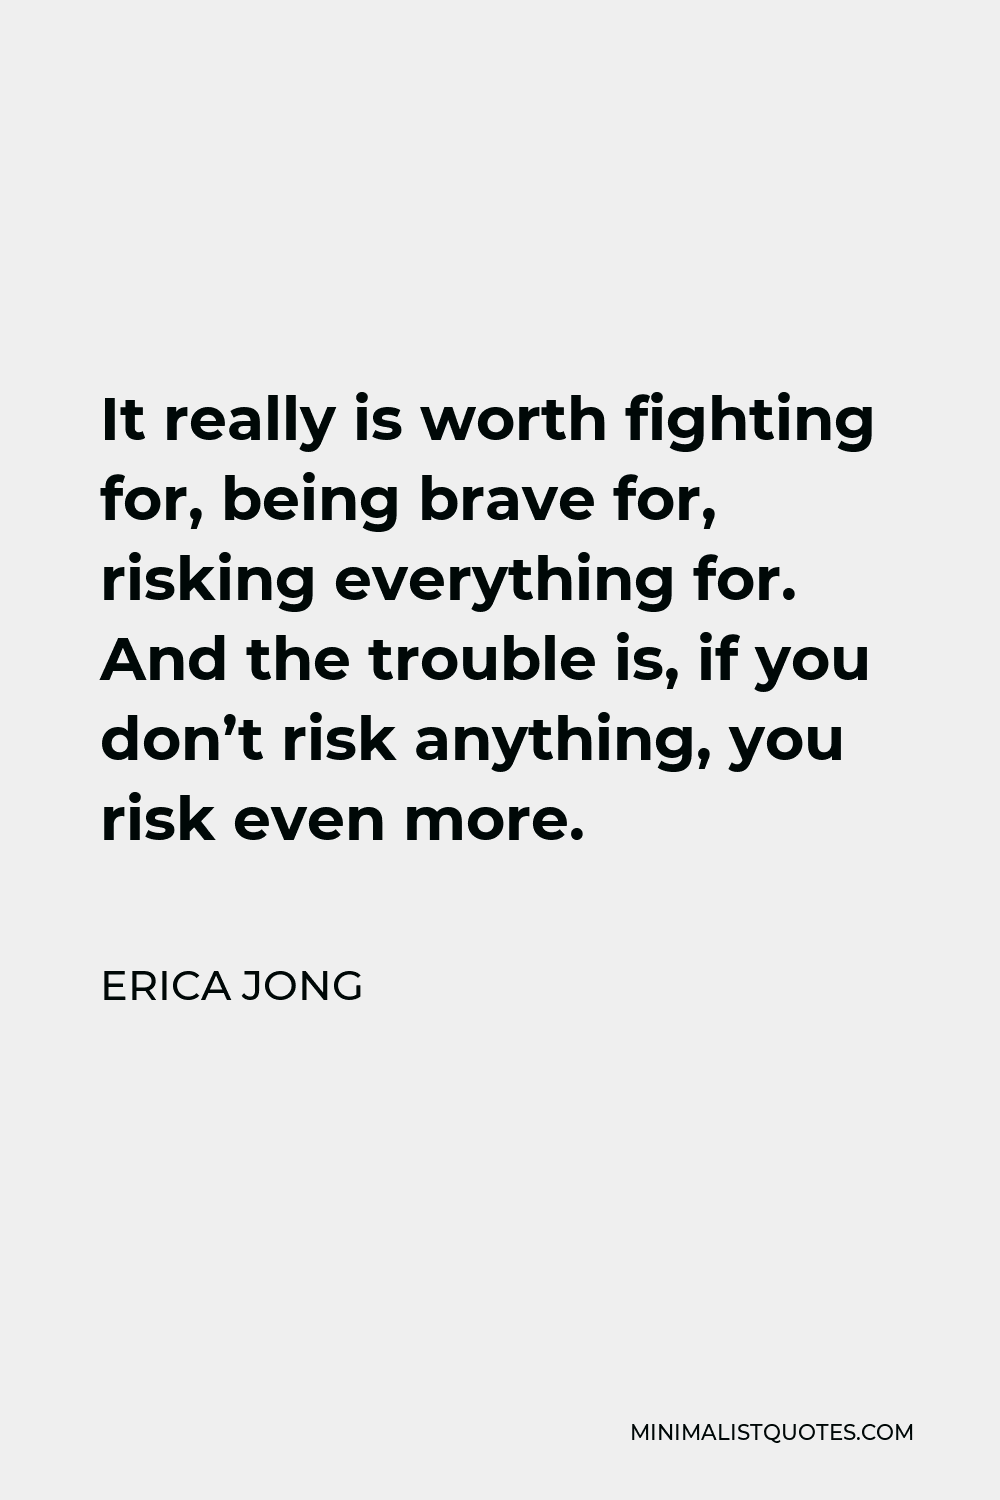 Erica Jong Quote - It really is worth fighting for, being brave for, risking everything for. And the trouble is, if you don’t risk anything, you risk even more.